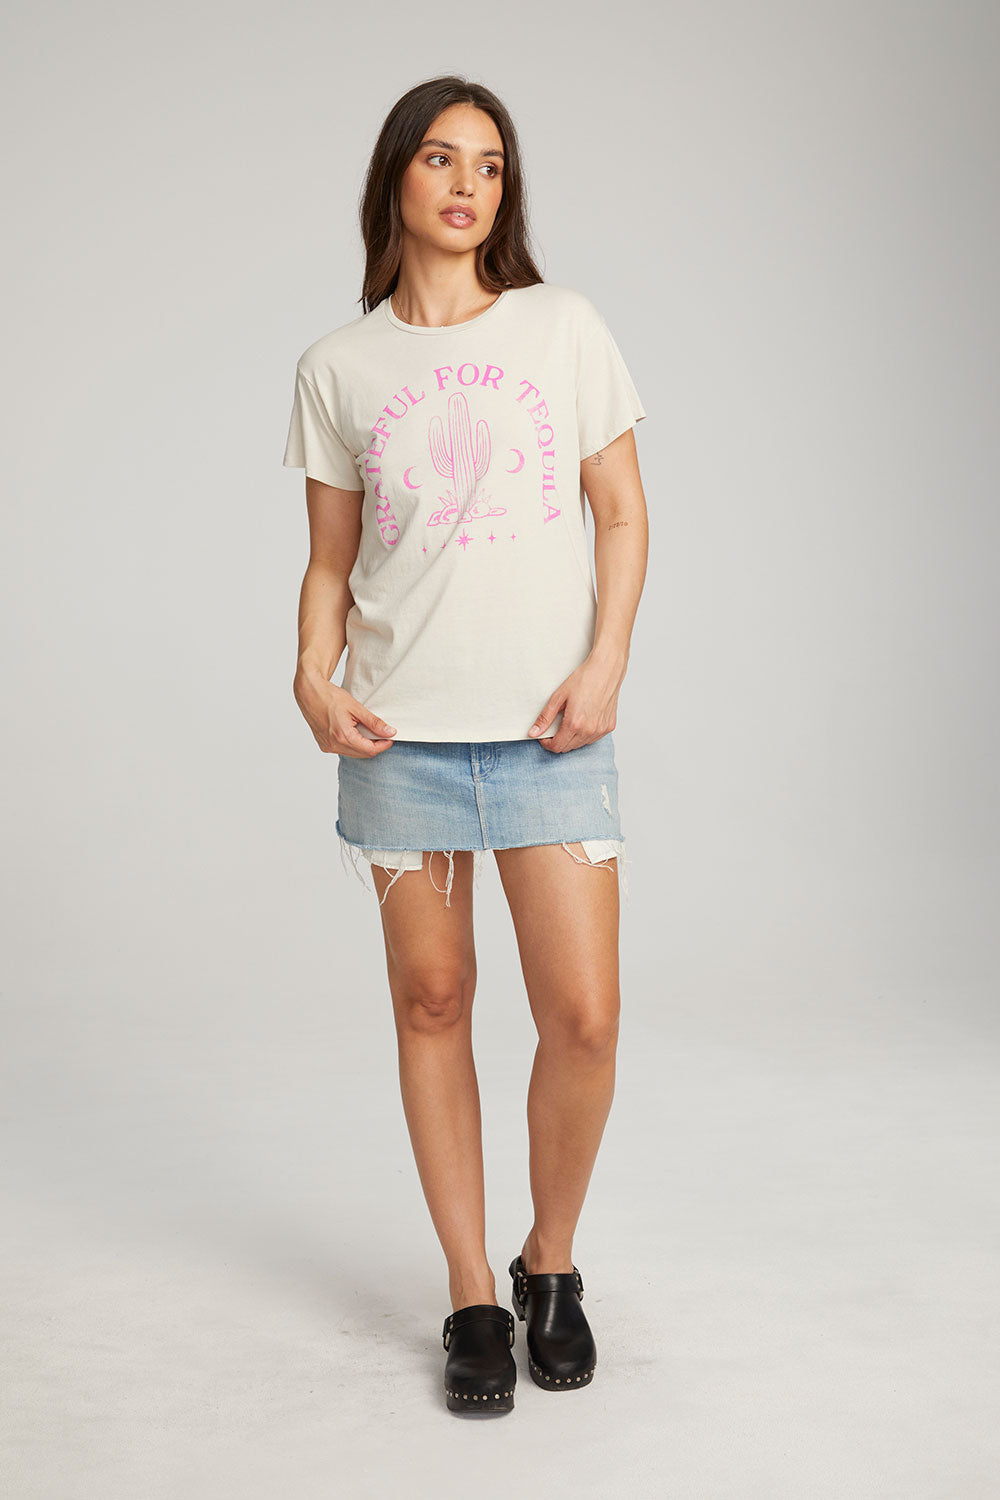 Tequila Tee WOMENS chaserbrand